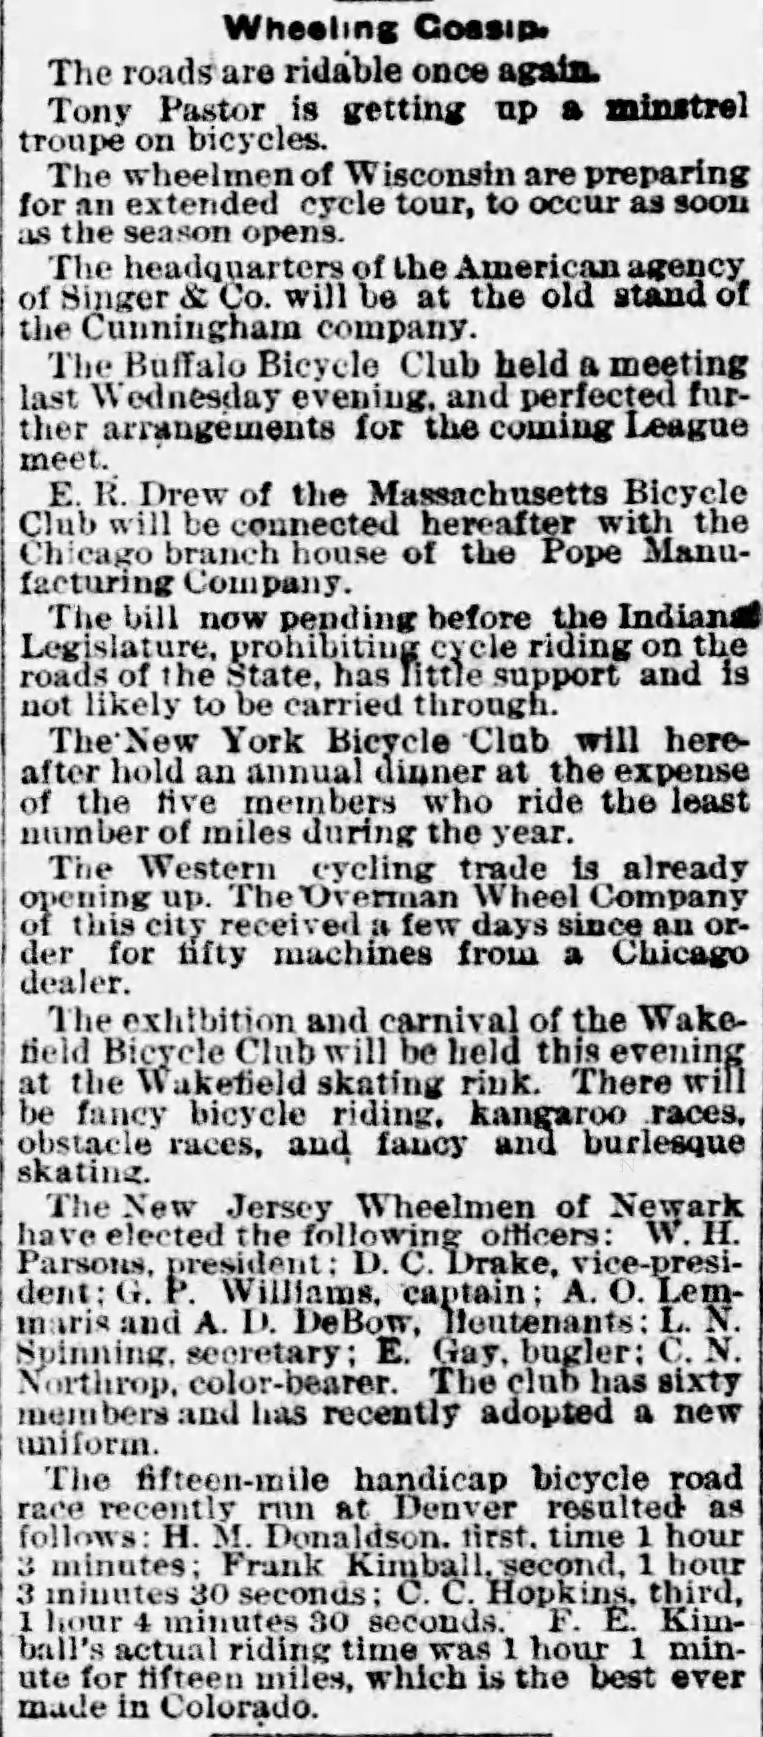 First mention of C. C. Hopkins in a bicycle race